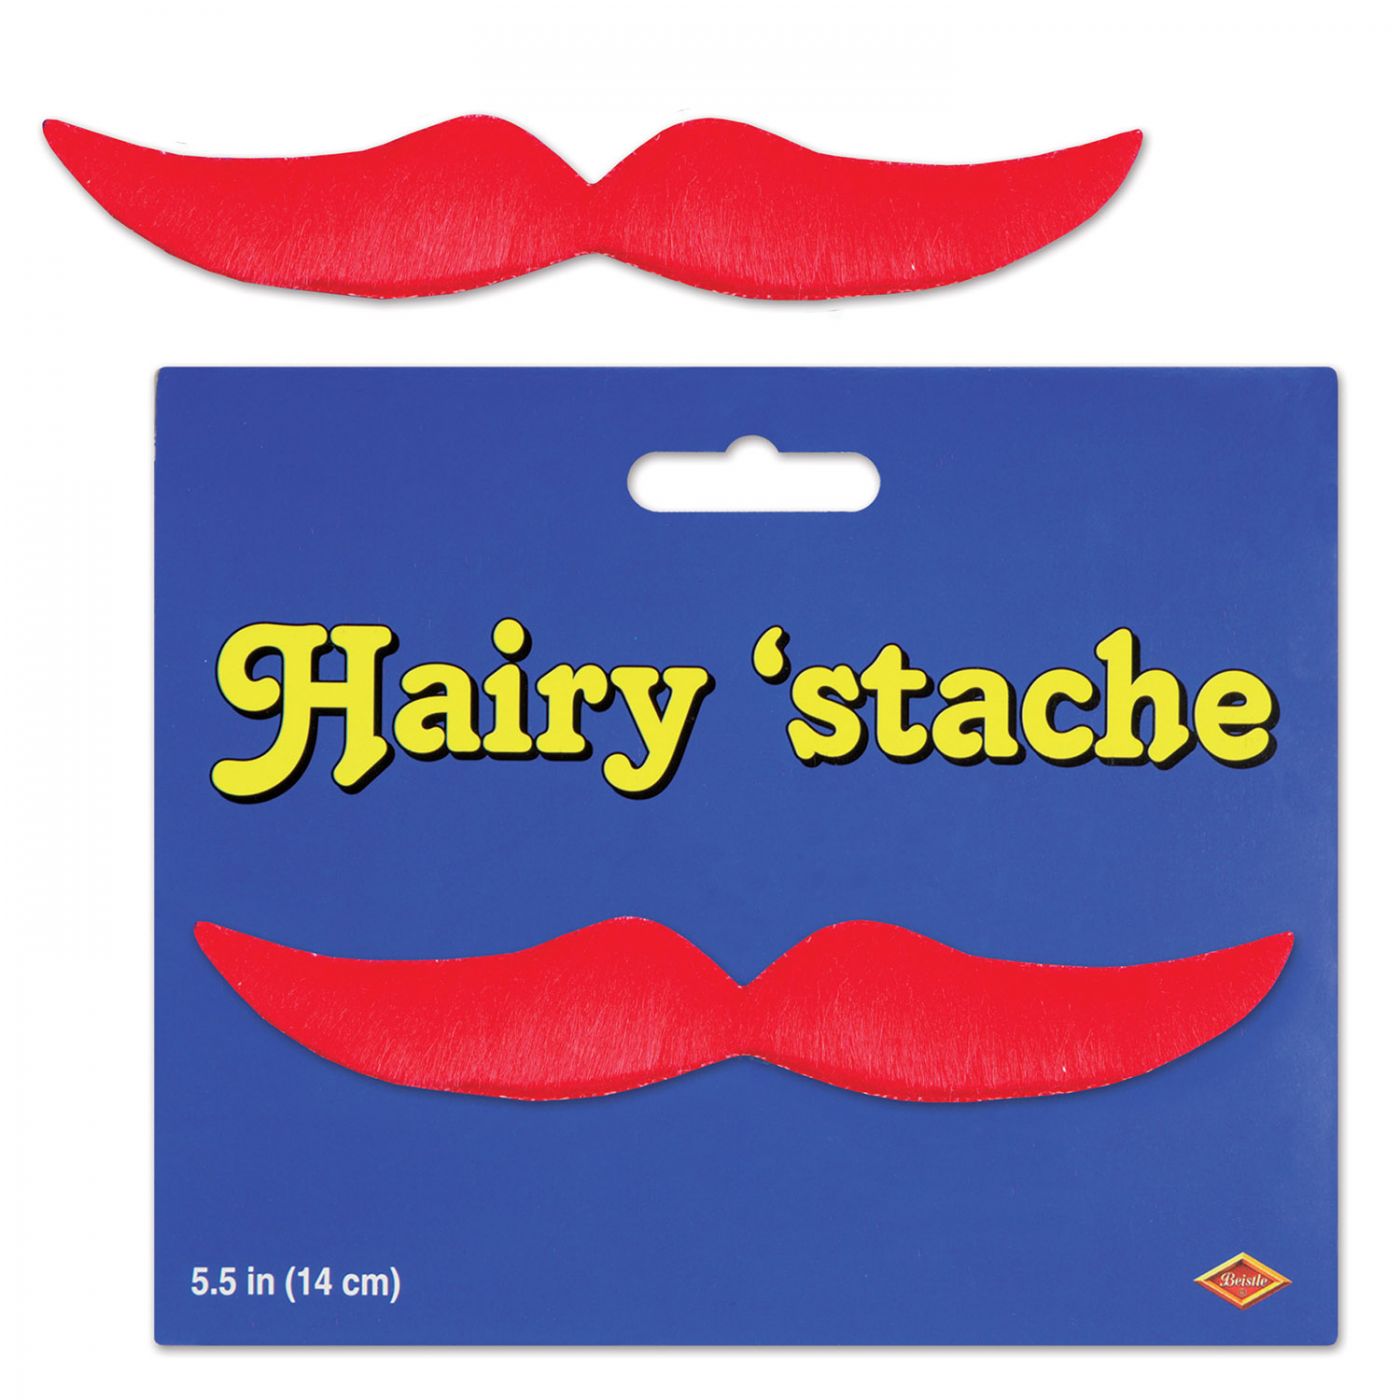 Hairy 'stache (12) image